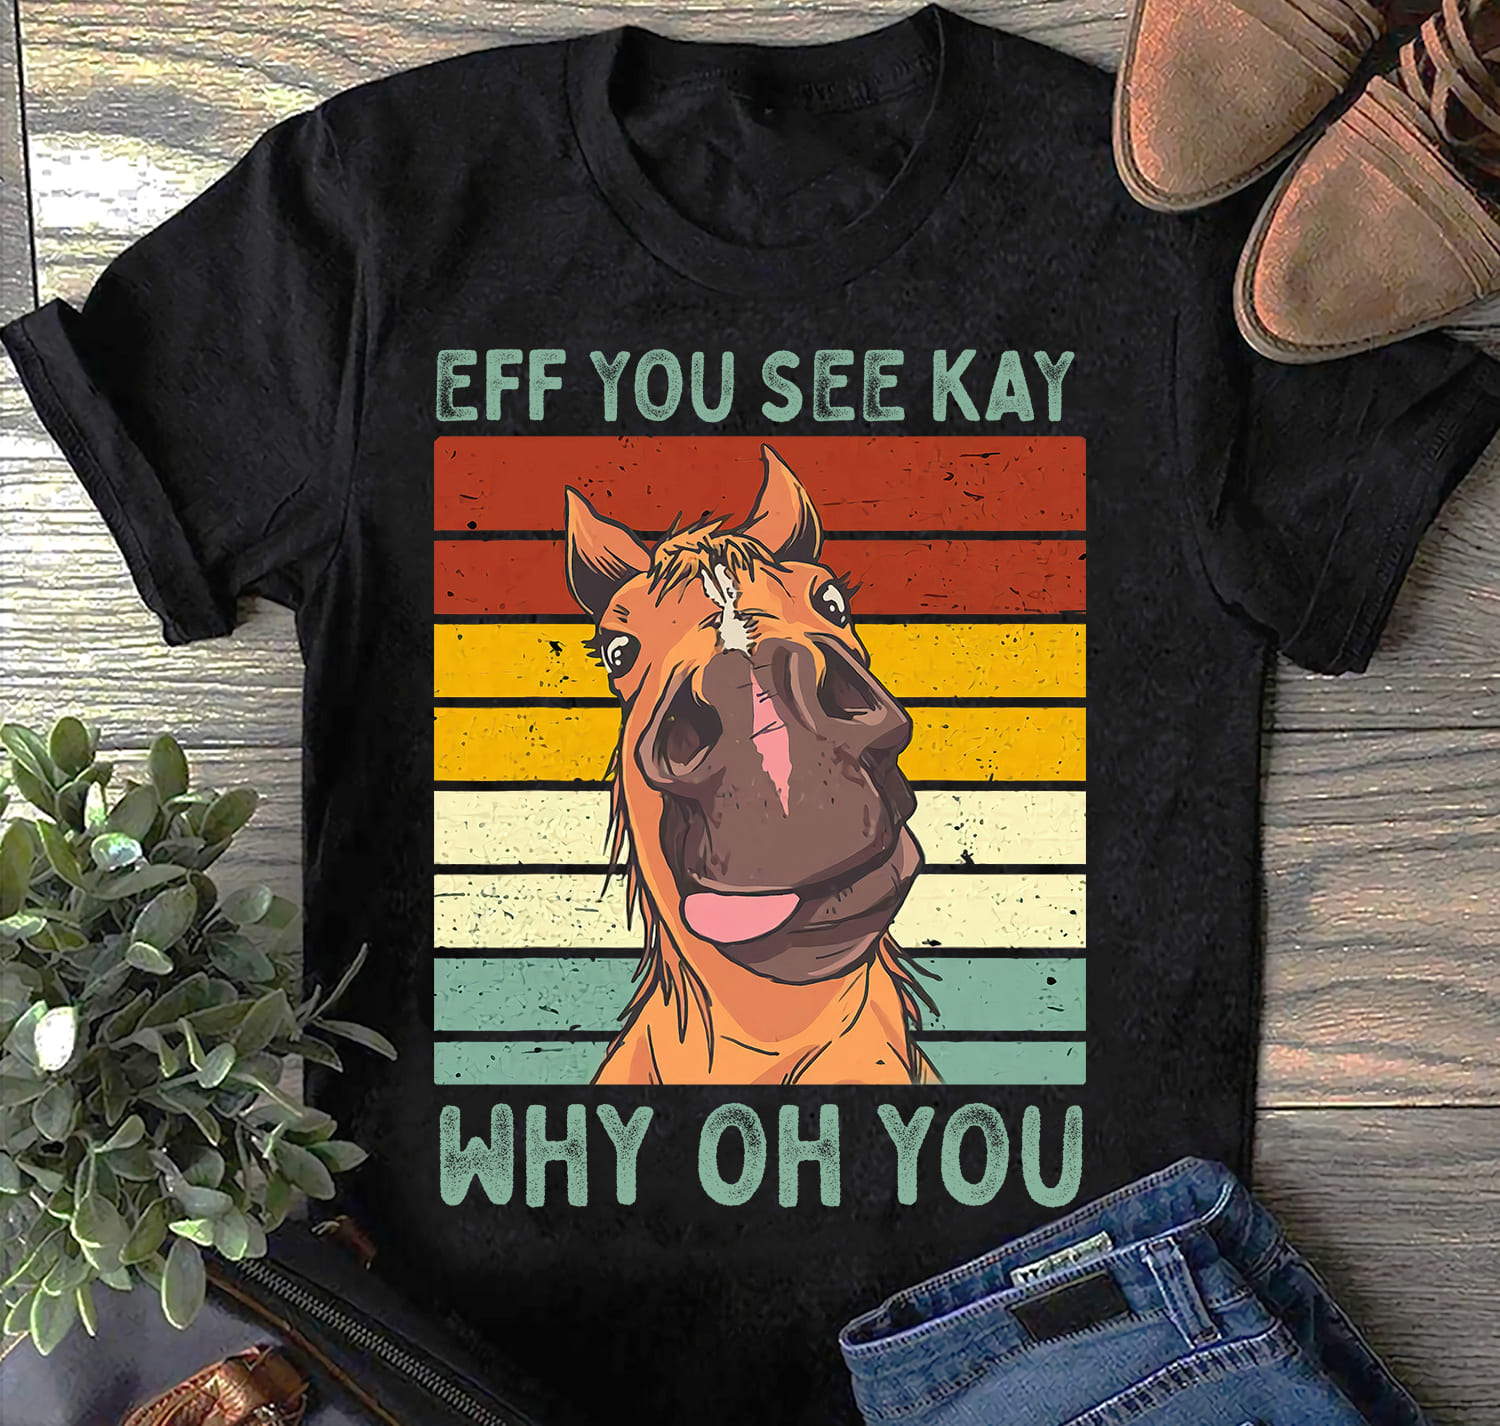 Eff you see kay, why oh you - Funny horse T-shirt, horse lover gift